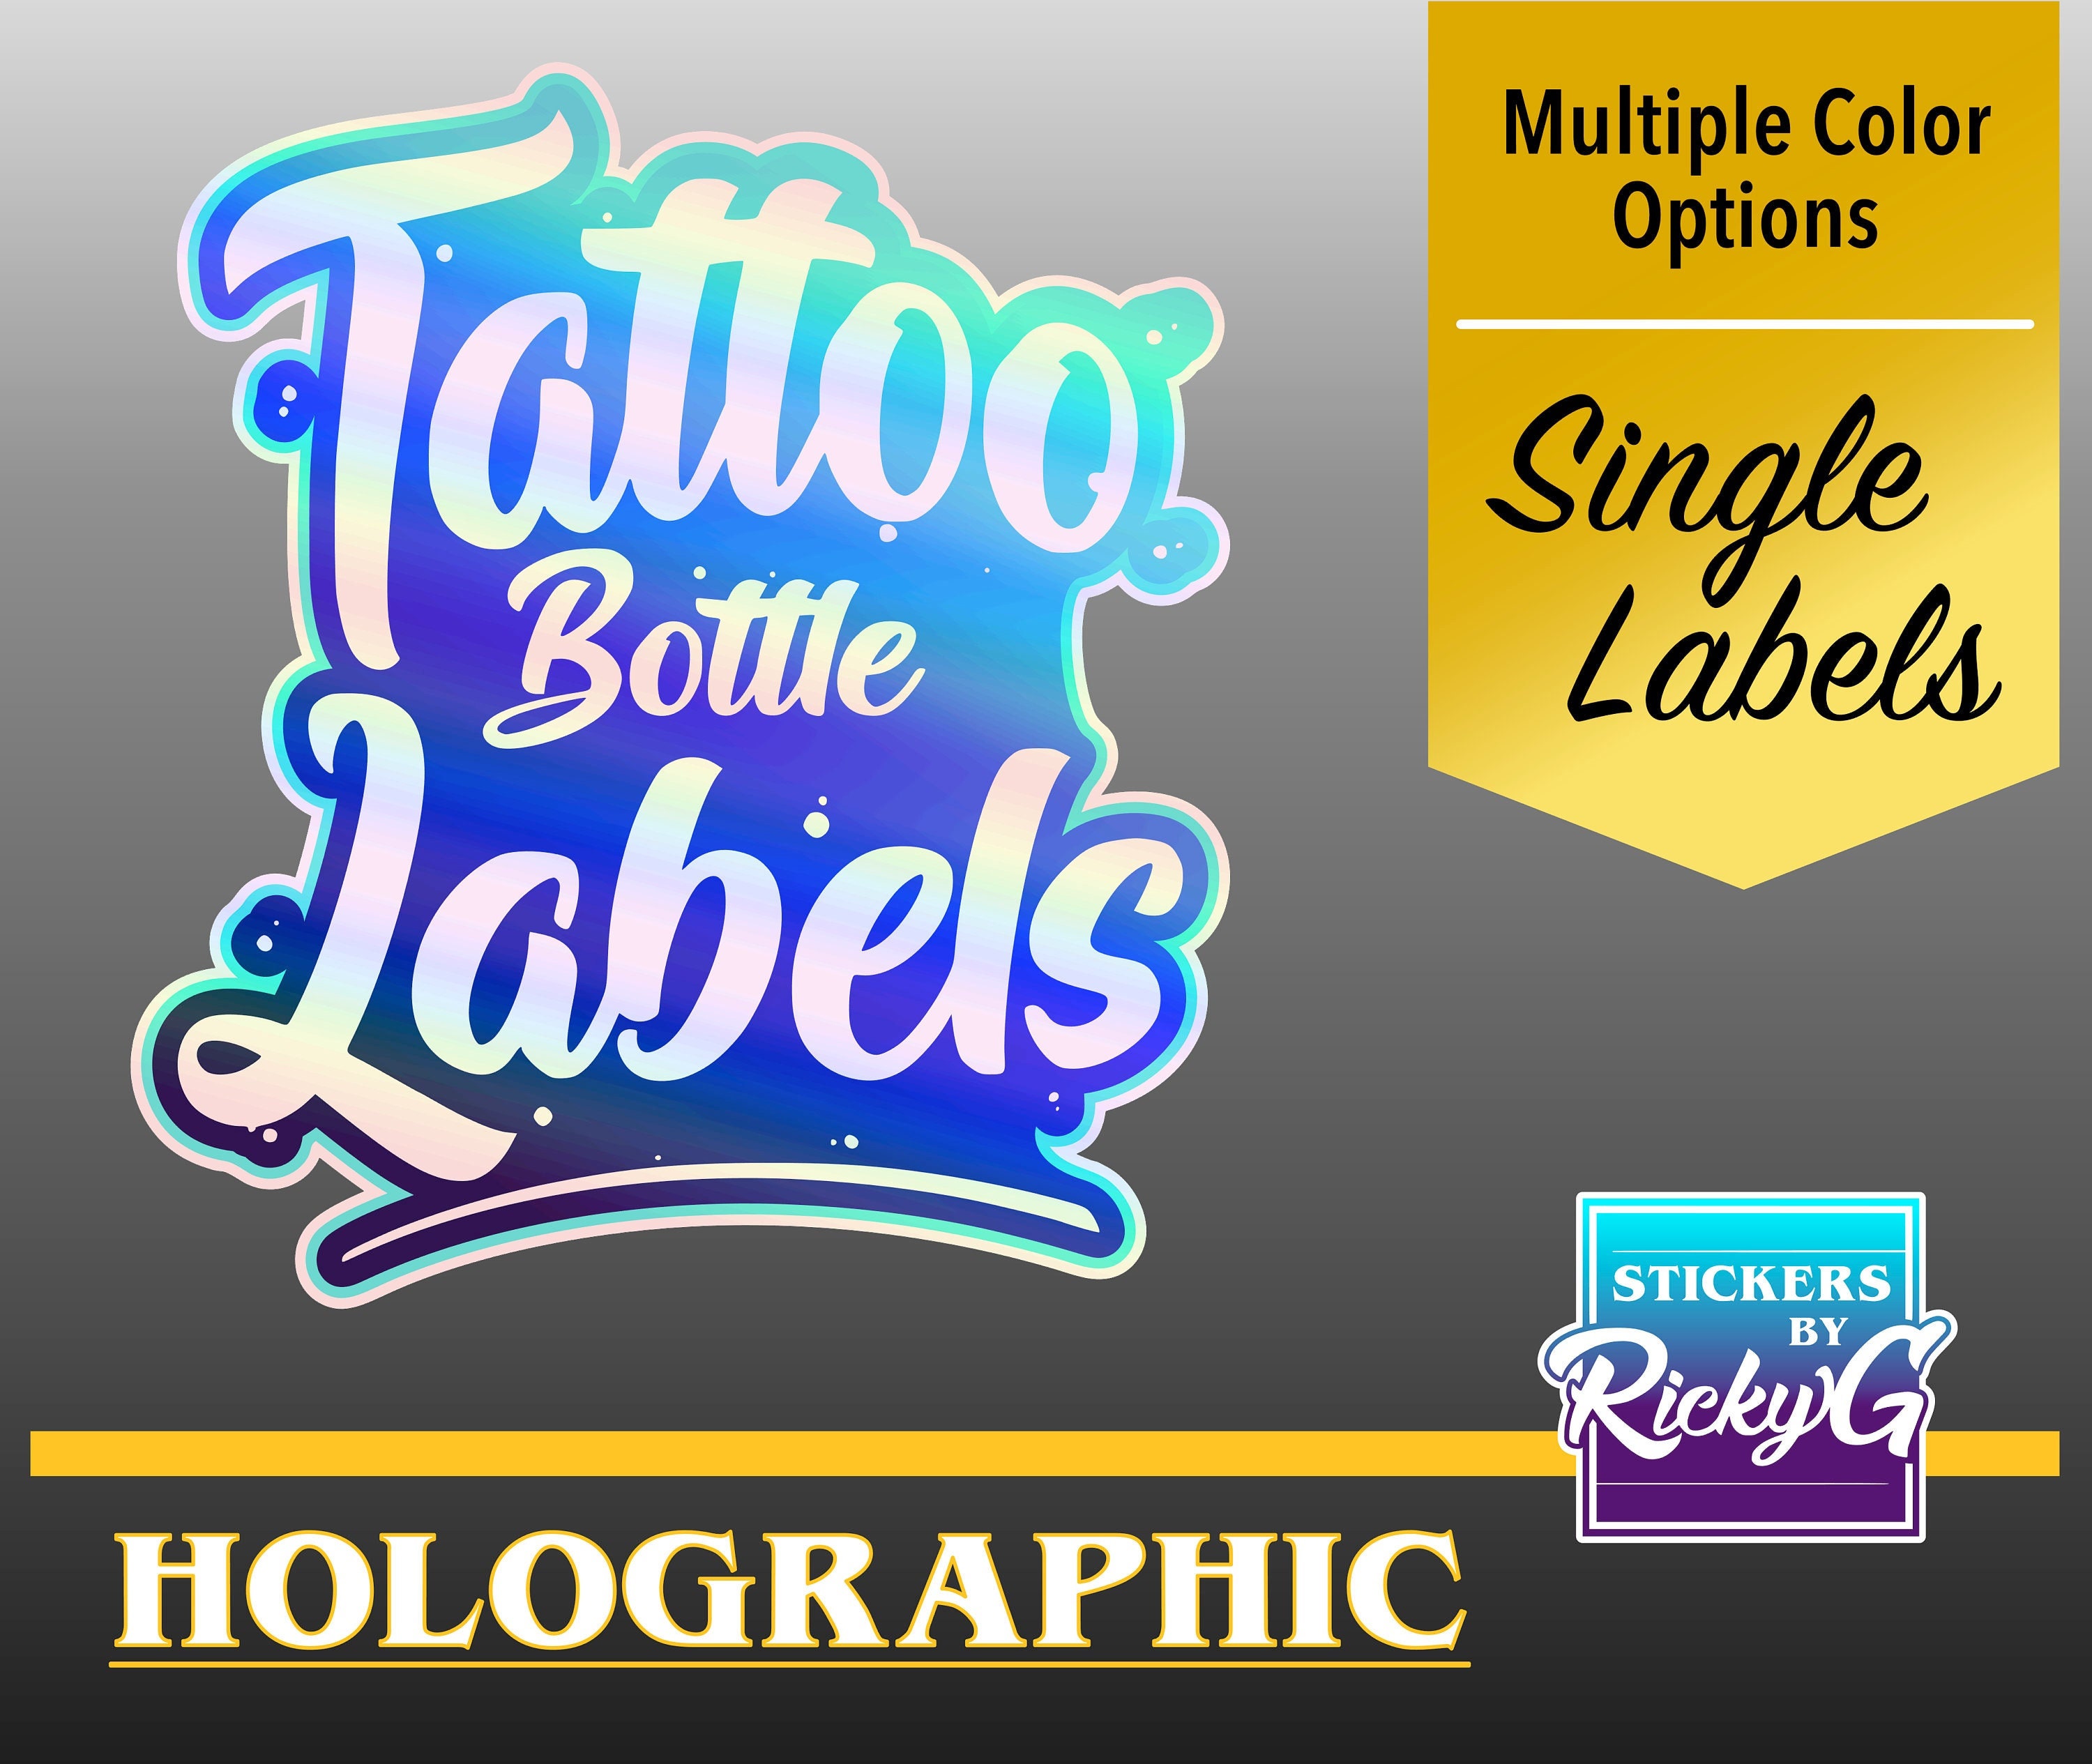 Holographic Tattoo Inspired Sicker Pack - Etsy